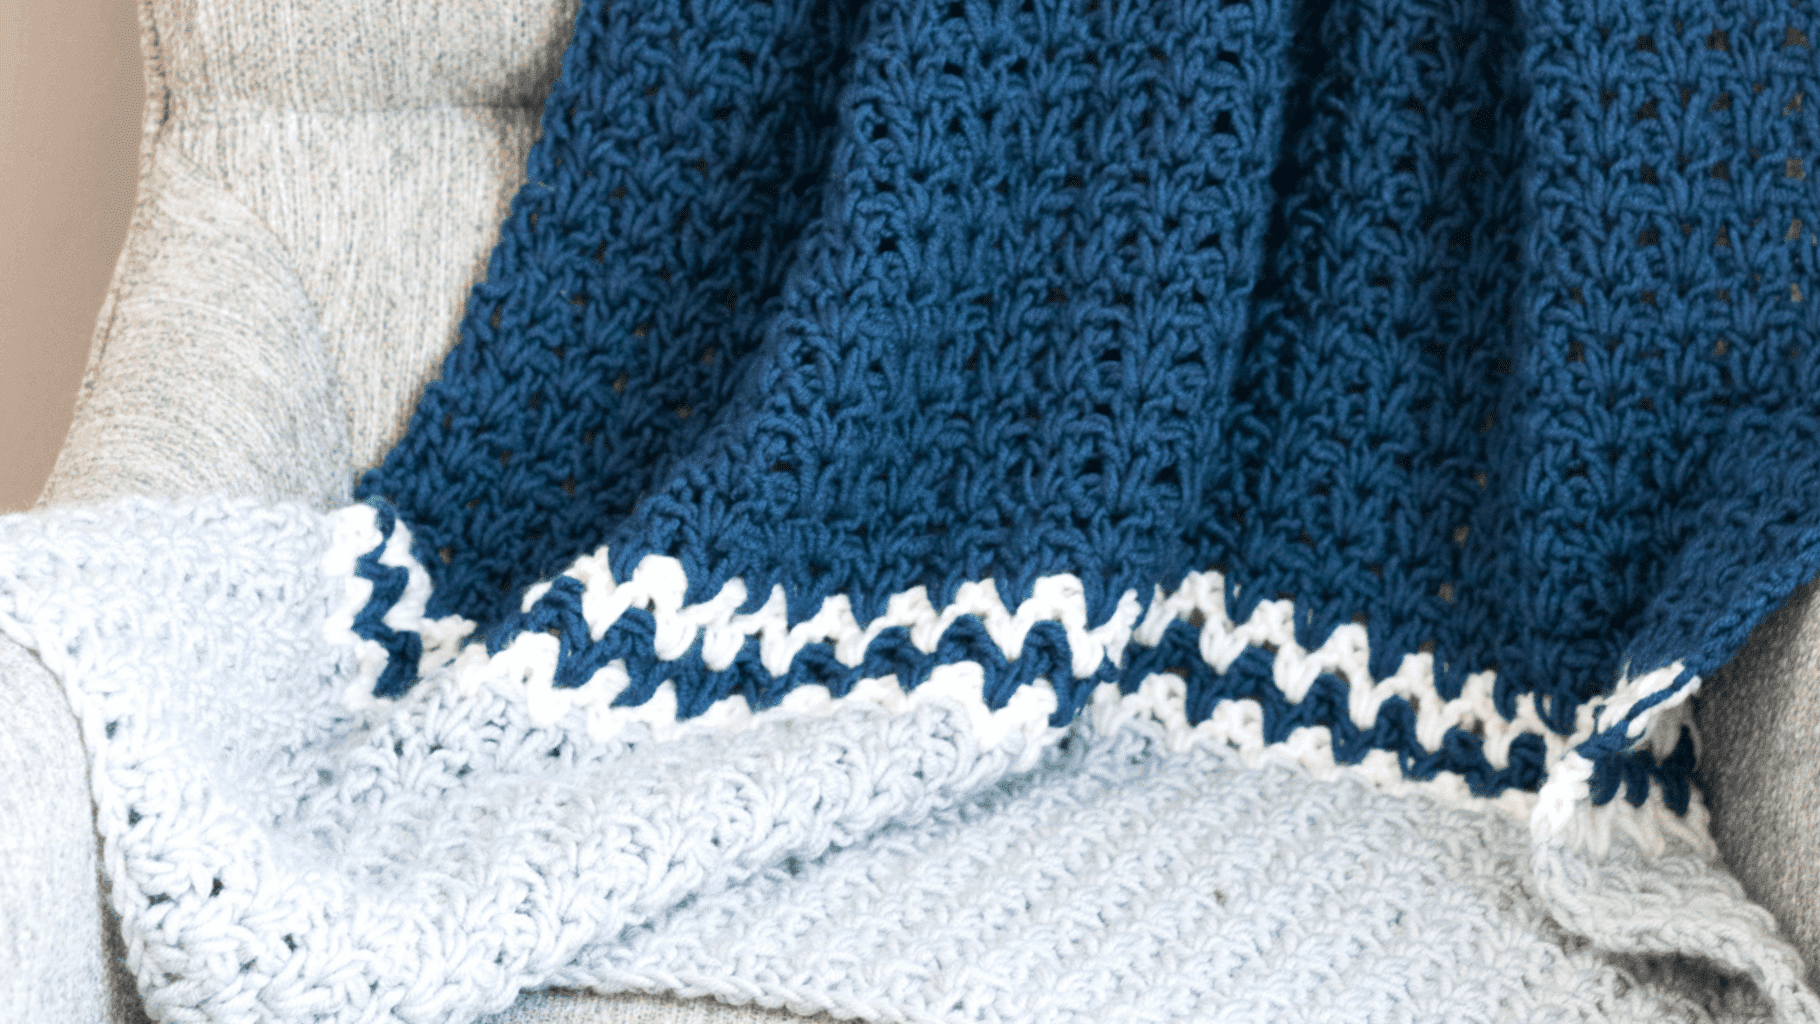 Quick and Easy Chunky Crochet V-Stitch Afghan (Leslie's Lapghan